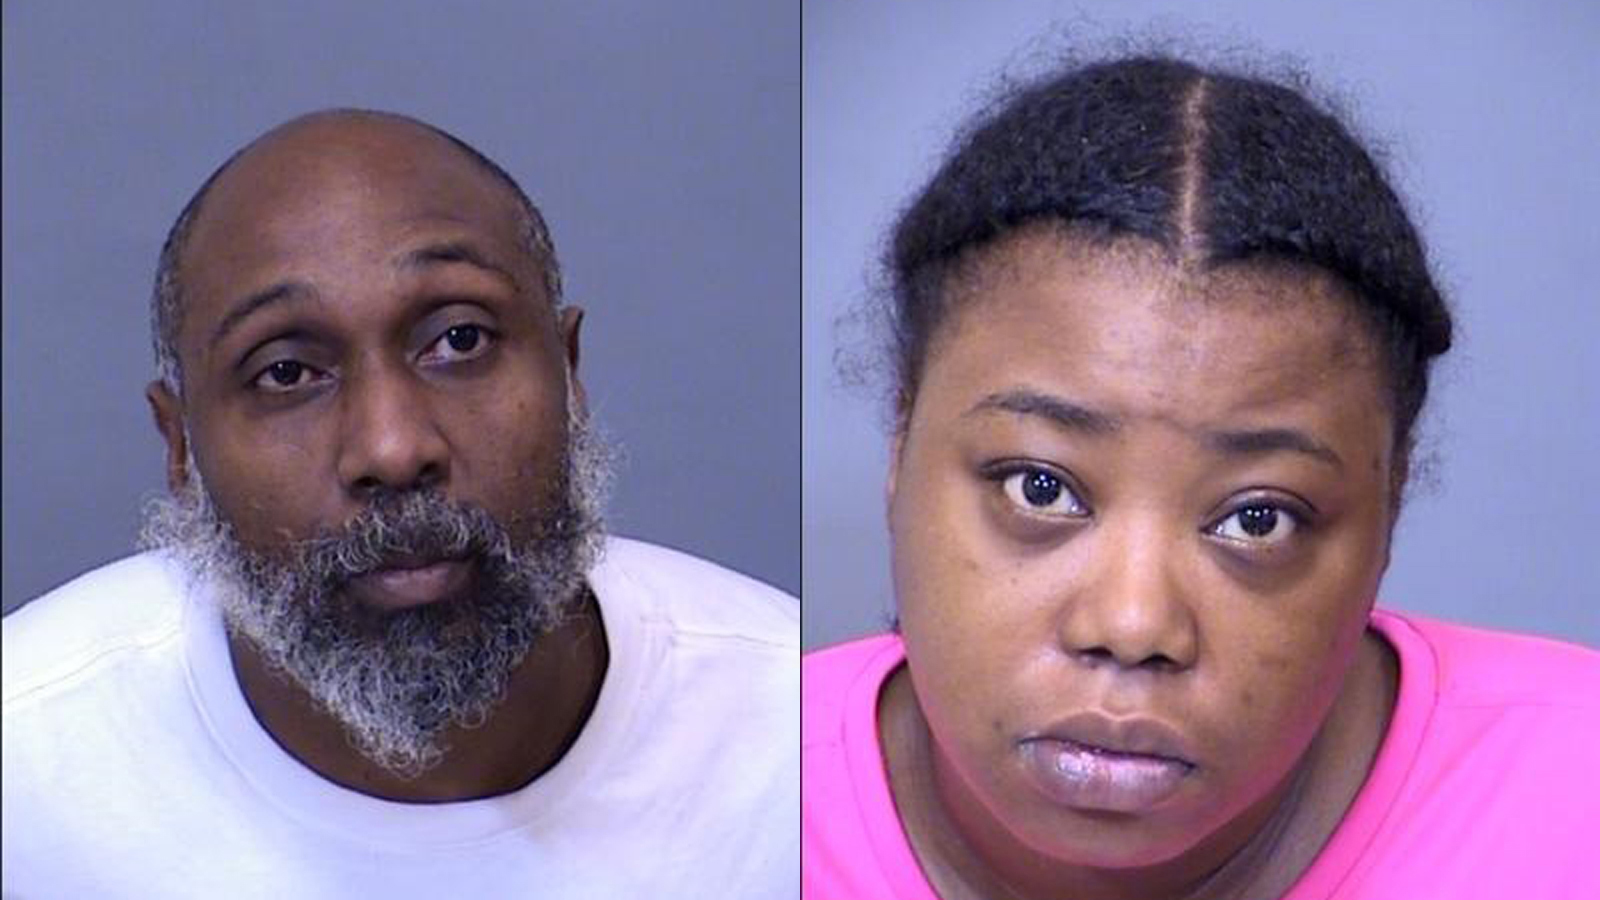 Kevin Lavell Rhymes, 44, and Laquasha Lachell Sebastian, 31, were arrested on child abuse and endan...